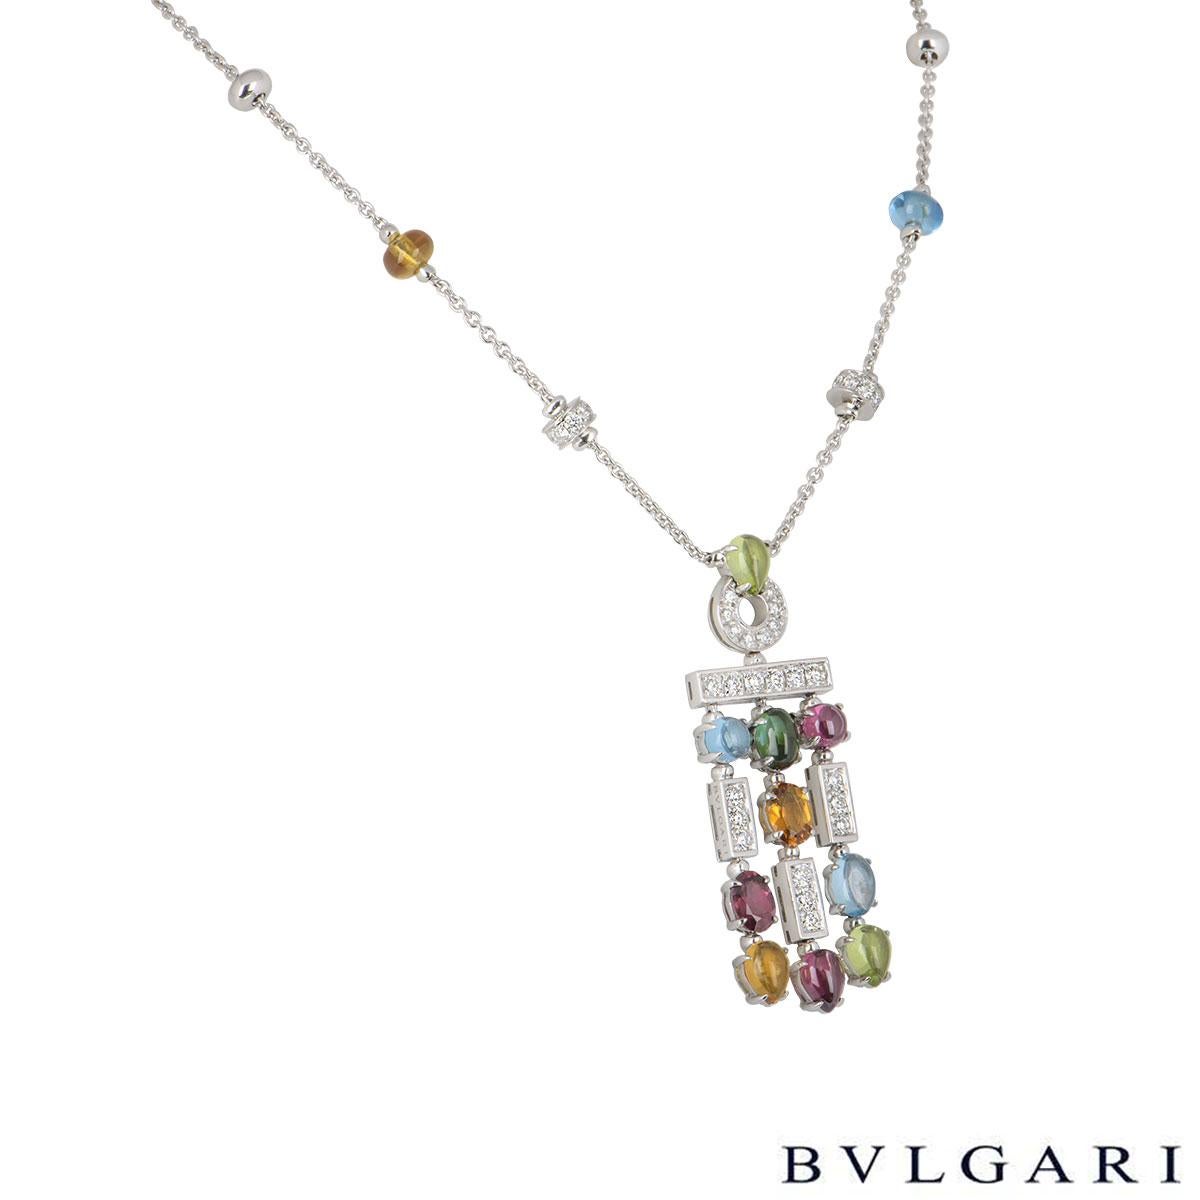 A stunning 18k white gold multi-gem suite by Bvlgari from the Allegra collection. The necklace features round brilliant cut diamonds along with peridot, amethyst, citrine, garnet, topaz and tourmaline in a mixture of different cuts. One earring is